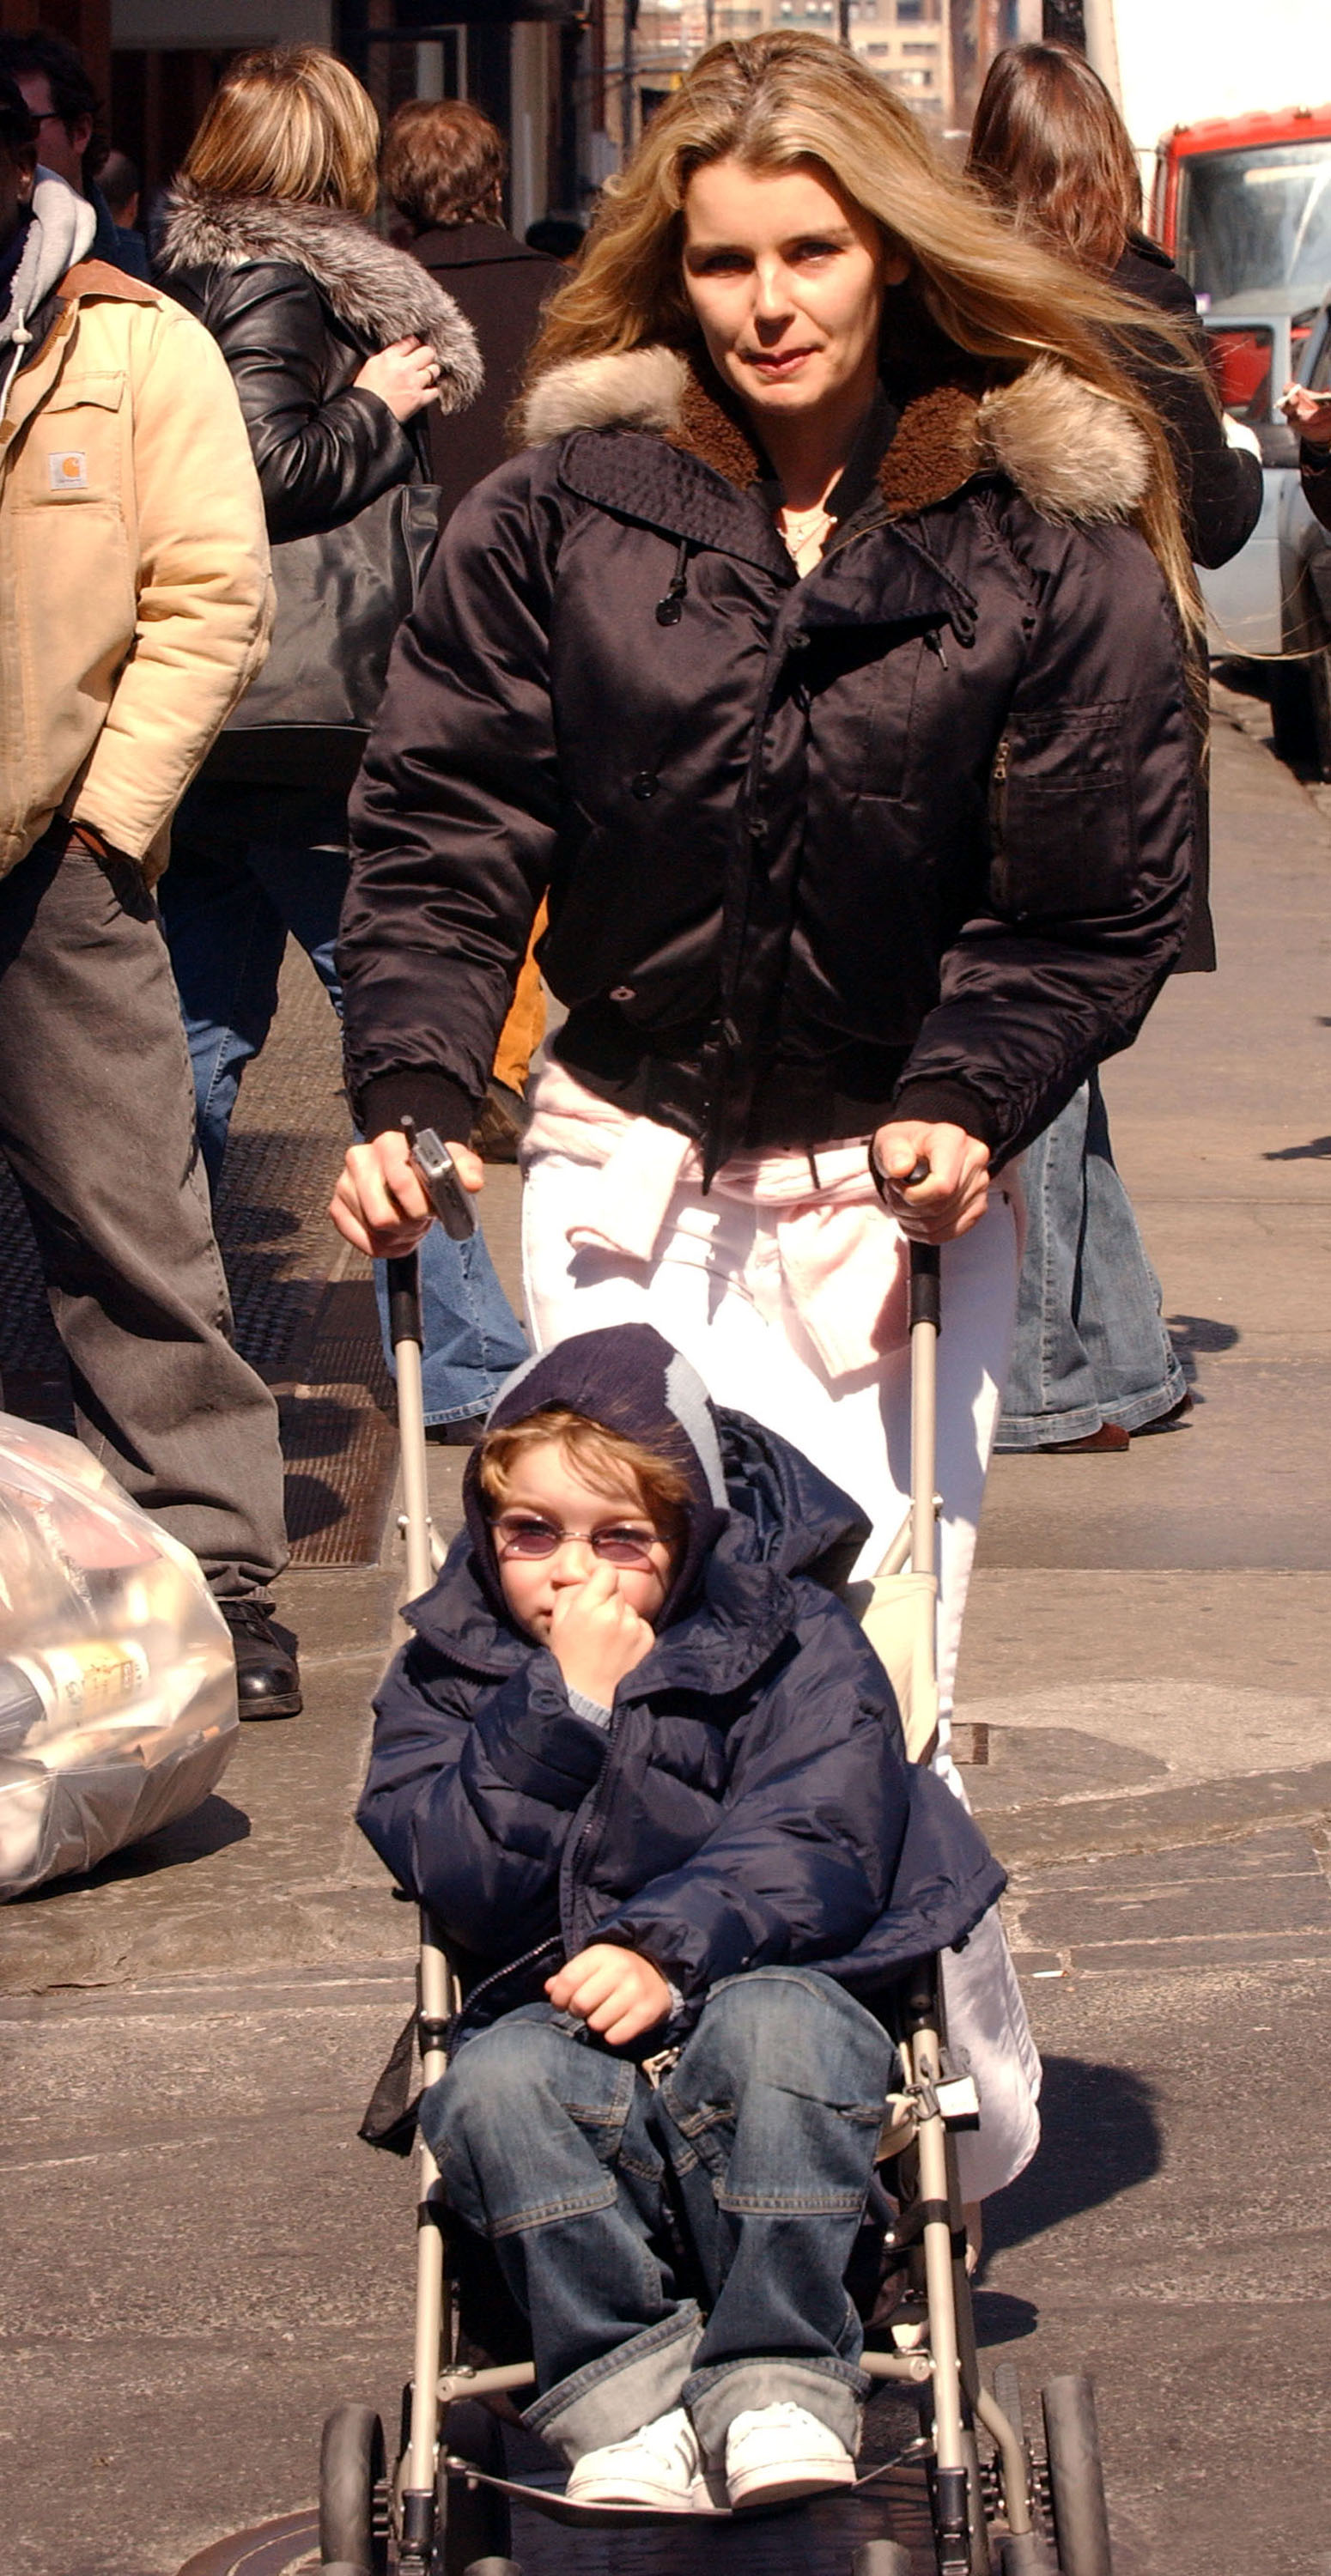 Christopher Cain and Samantha Torres spotted in New York City on March 18, 2005 | Source: Getty Images